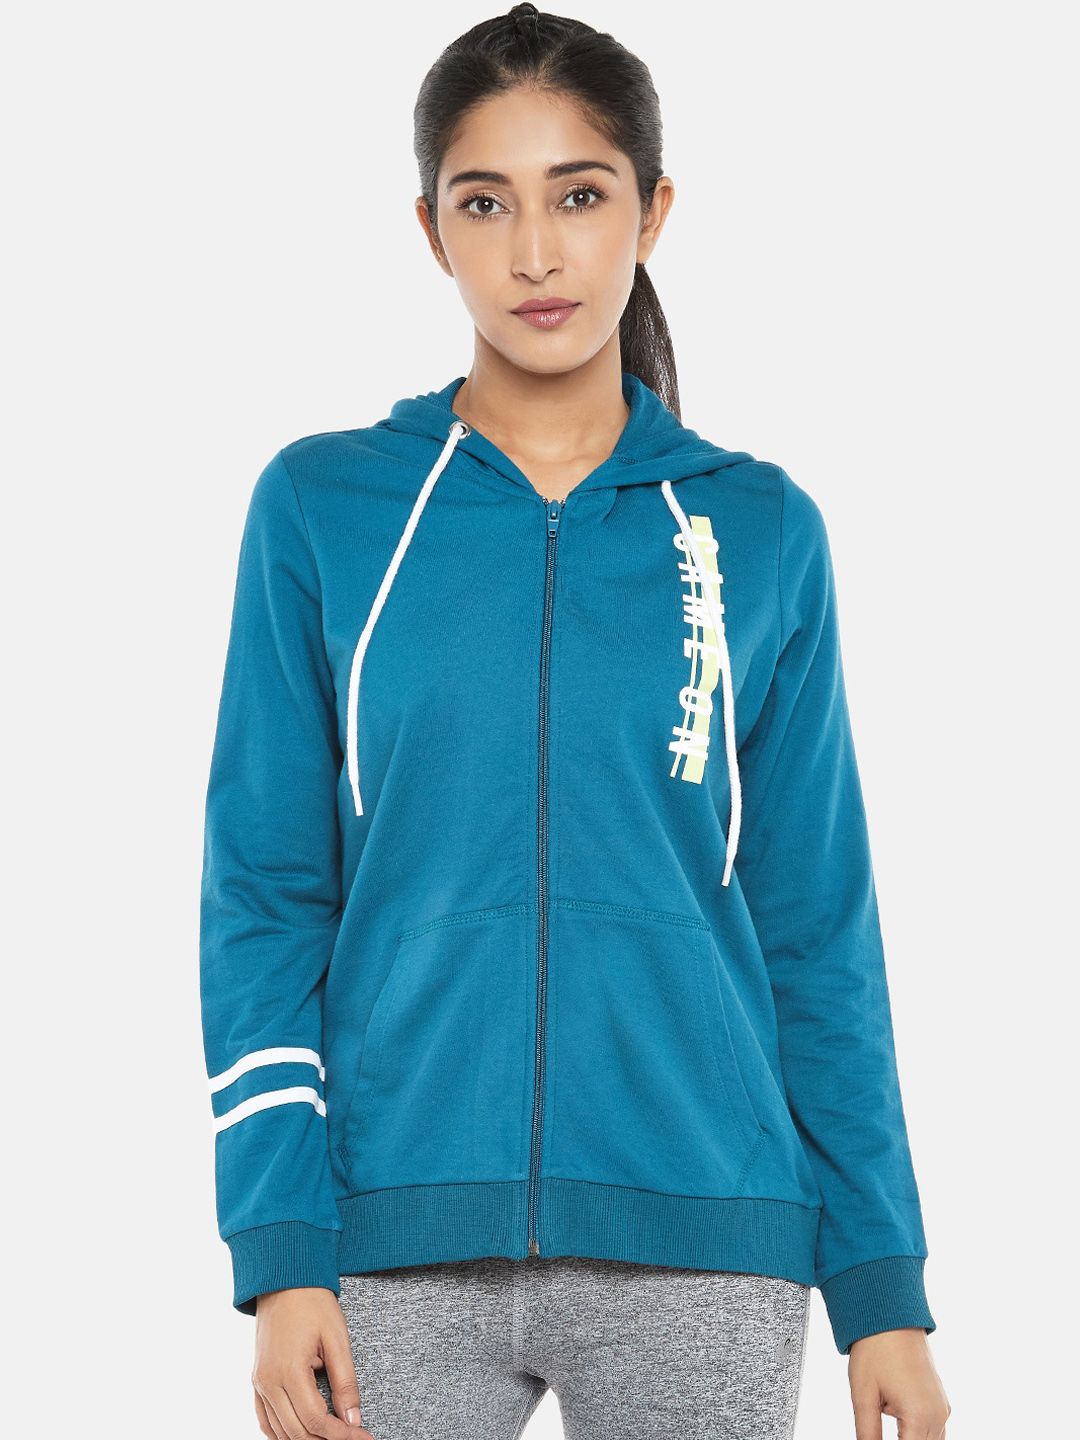 Ajile by Pantaloons Women Teal Blue Solid Cotton Hooded Sweatshirt with Printed Detail Price in India